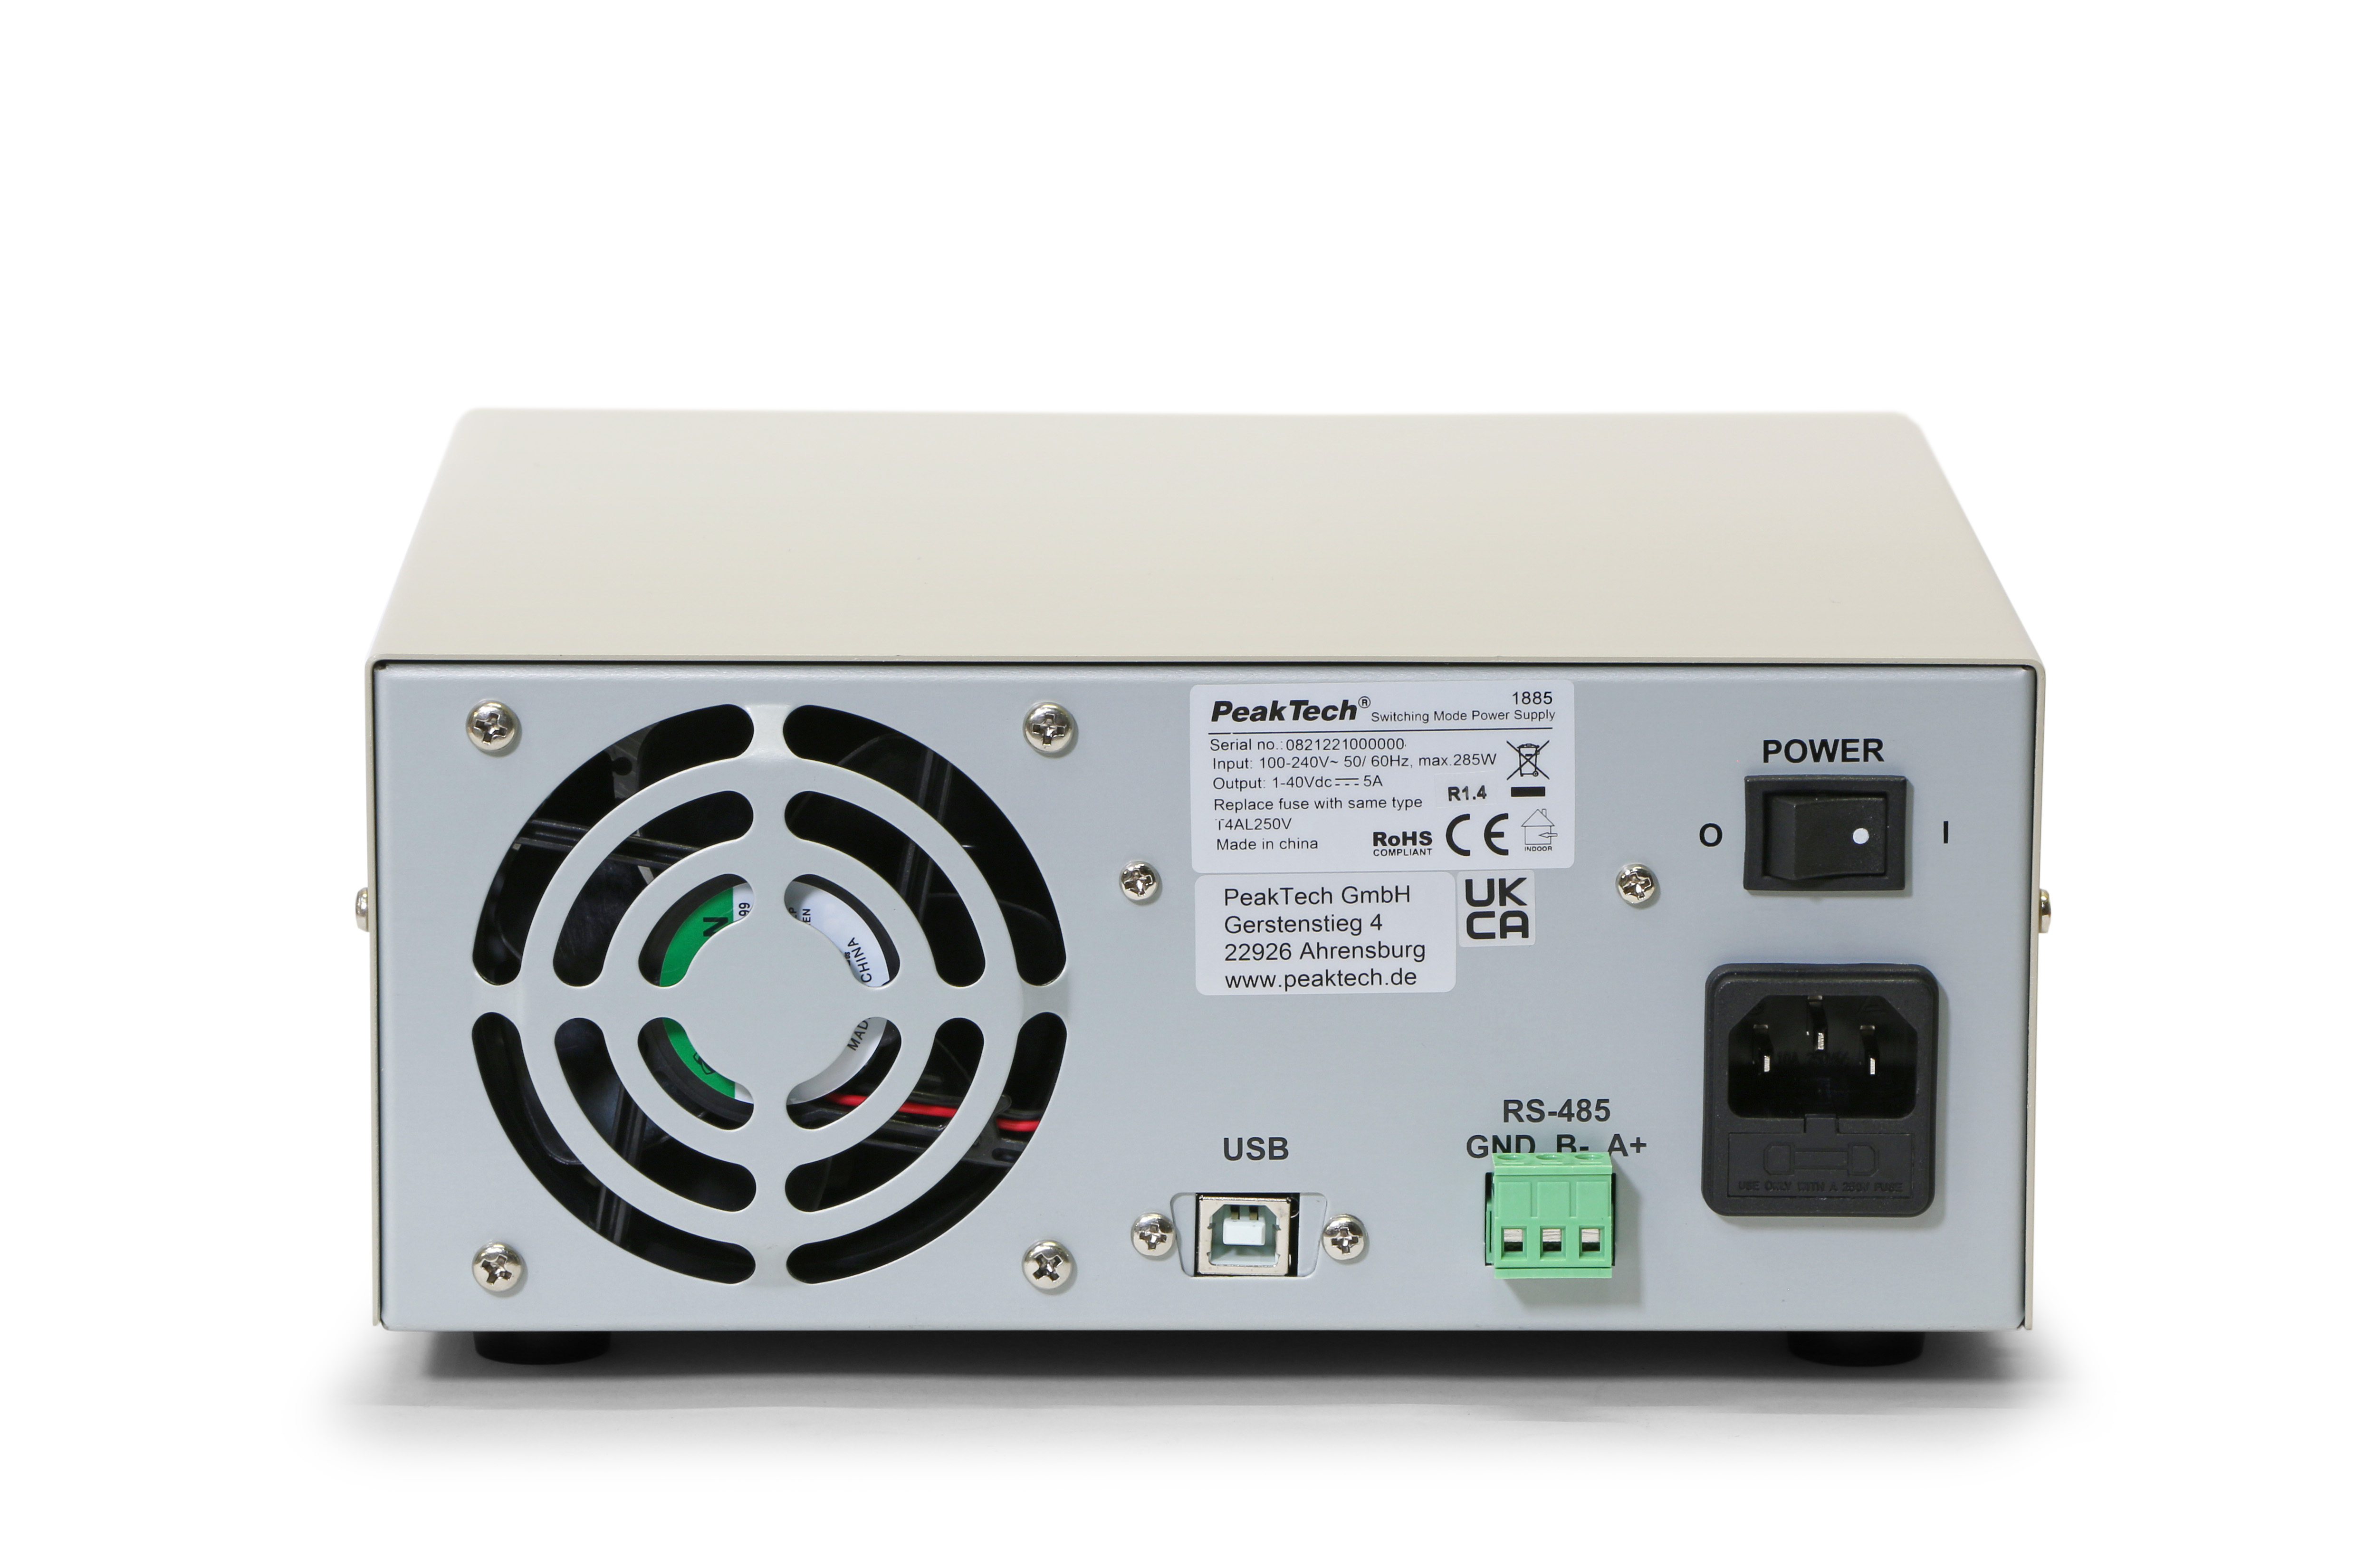 «PeakTech® P 1885» Laboratory power supply DC 1 - 40V / 0 - 5A with USB